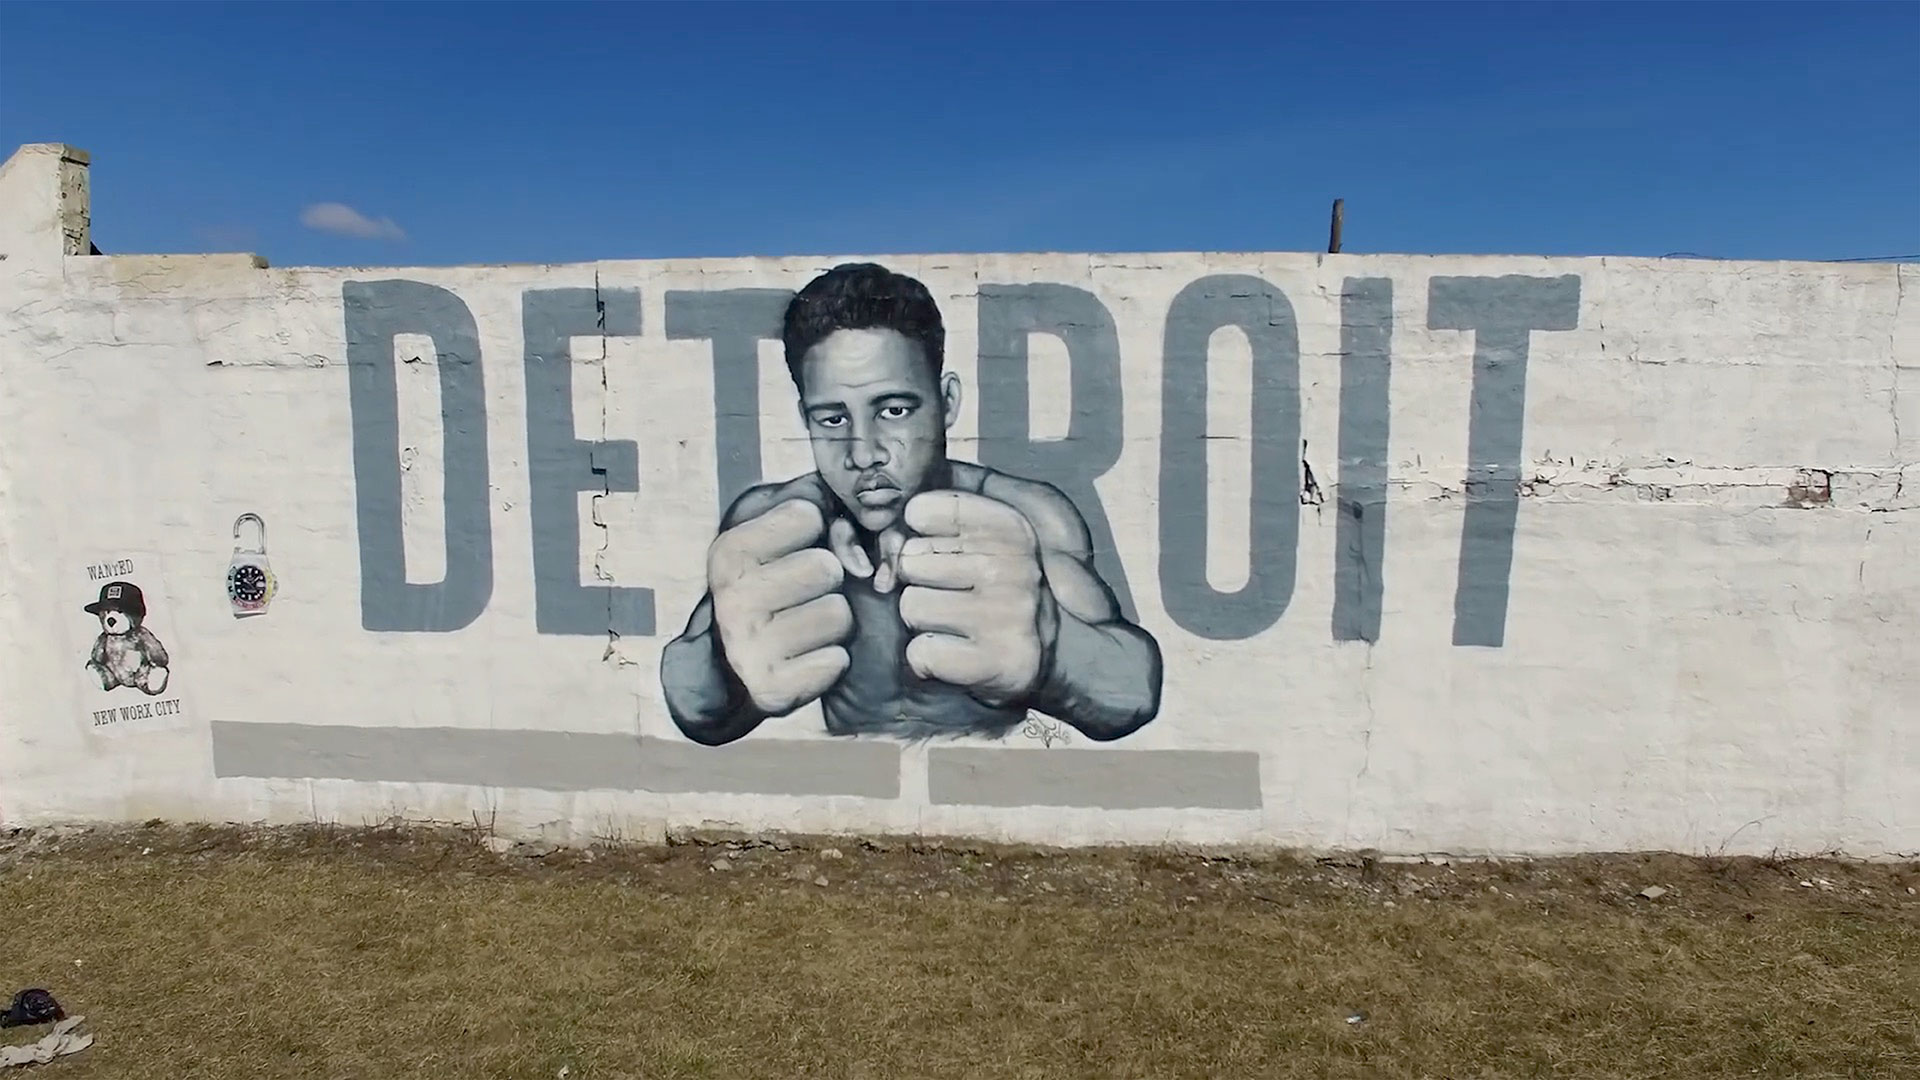 PAINTING THE TOWN – THE STREET ART OF DETROIT